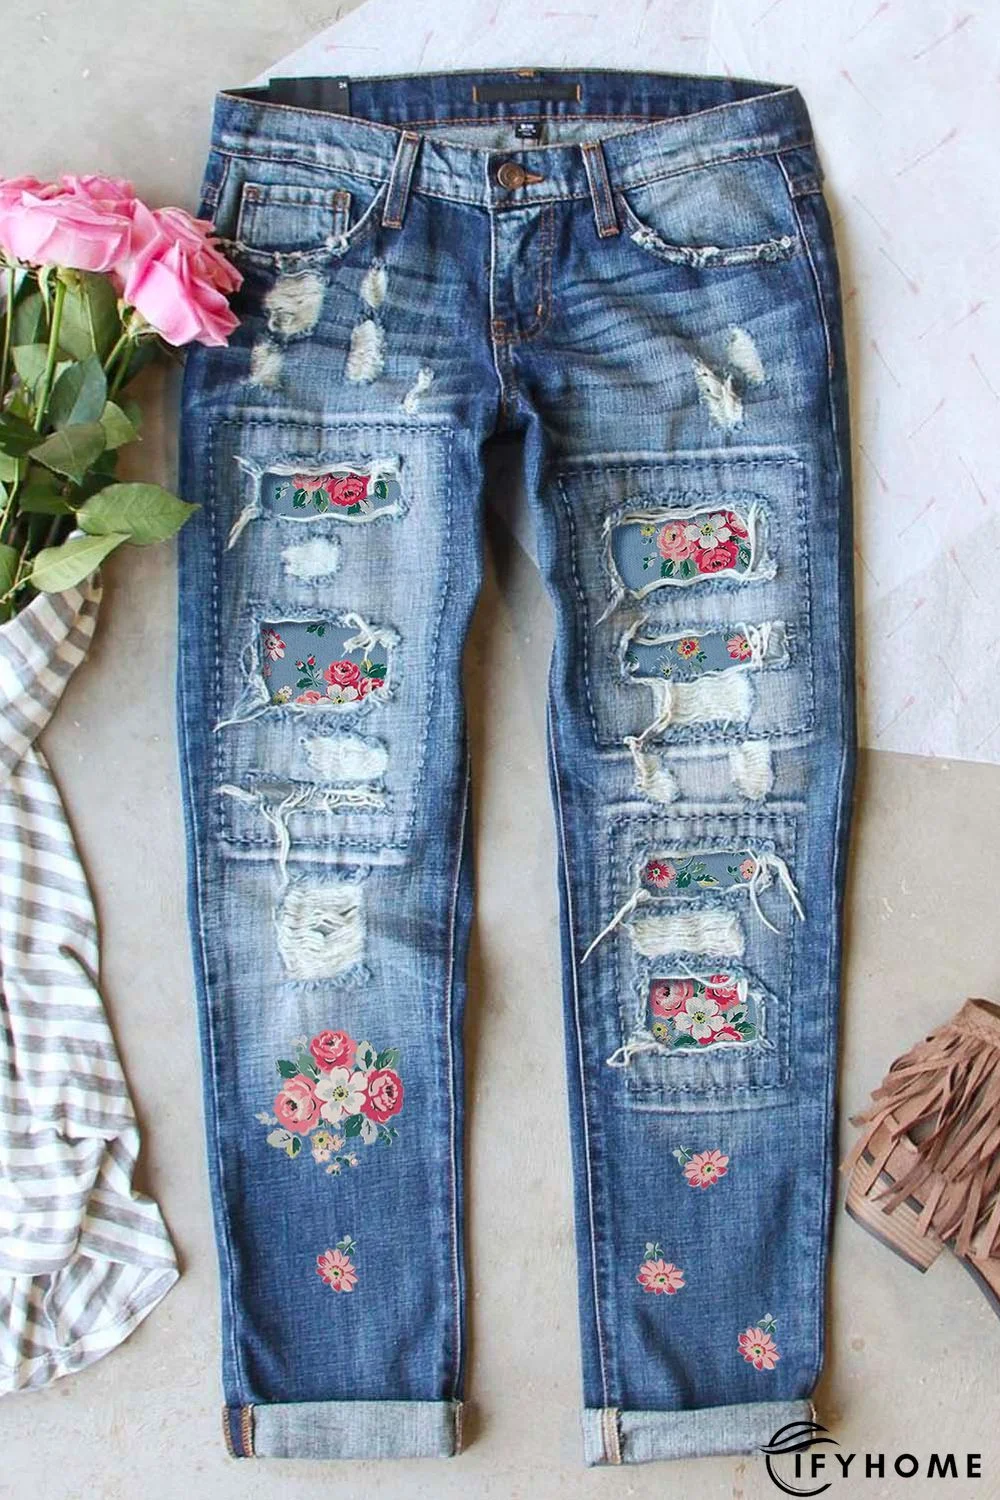 Sky Blue Floral Print Contrast Distressed Mid Waist Jeans | IFYHOME